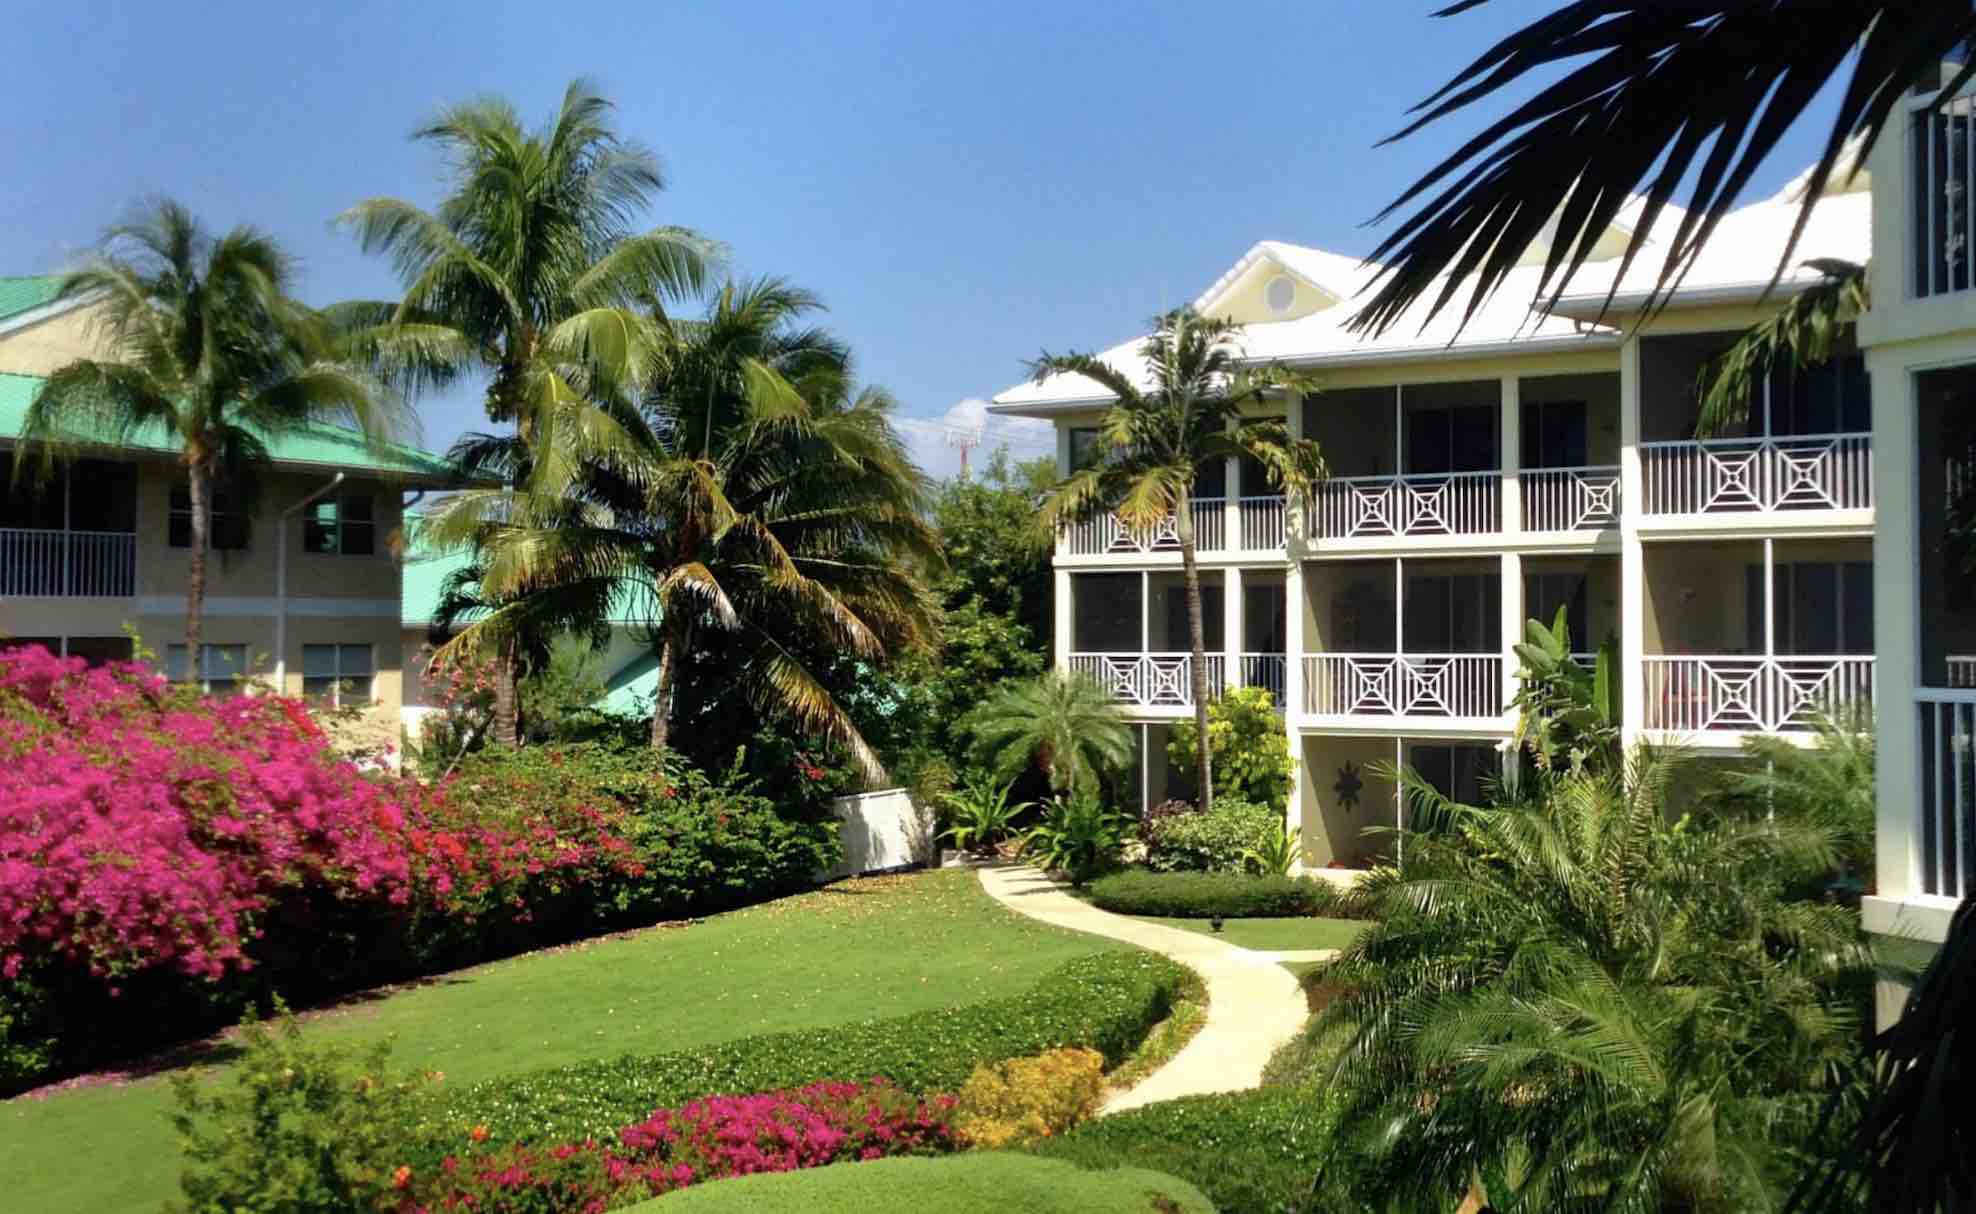 Luxury hotels in Cayman Islands include Crescent Point Resort exterior shown 